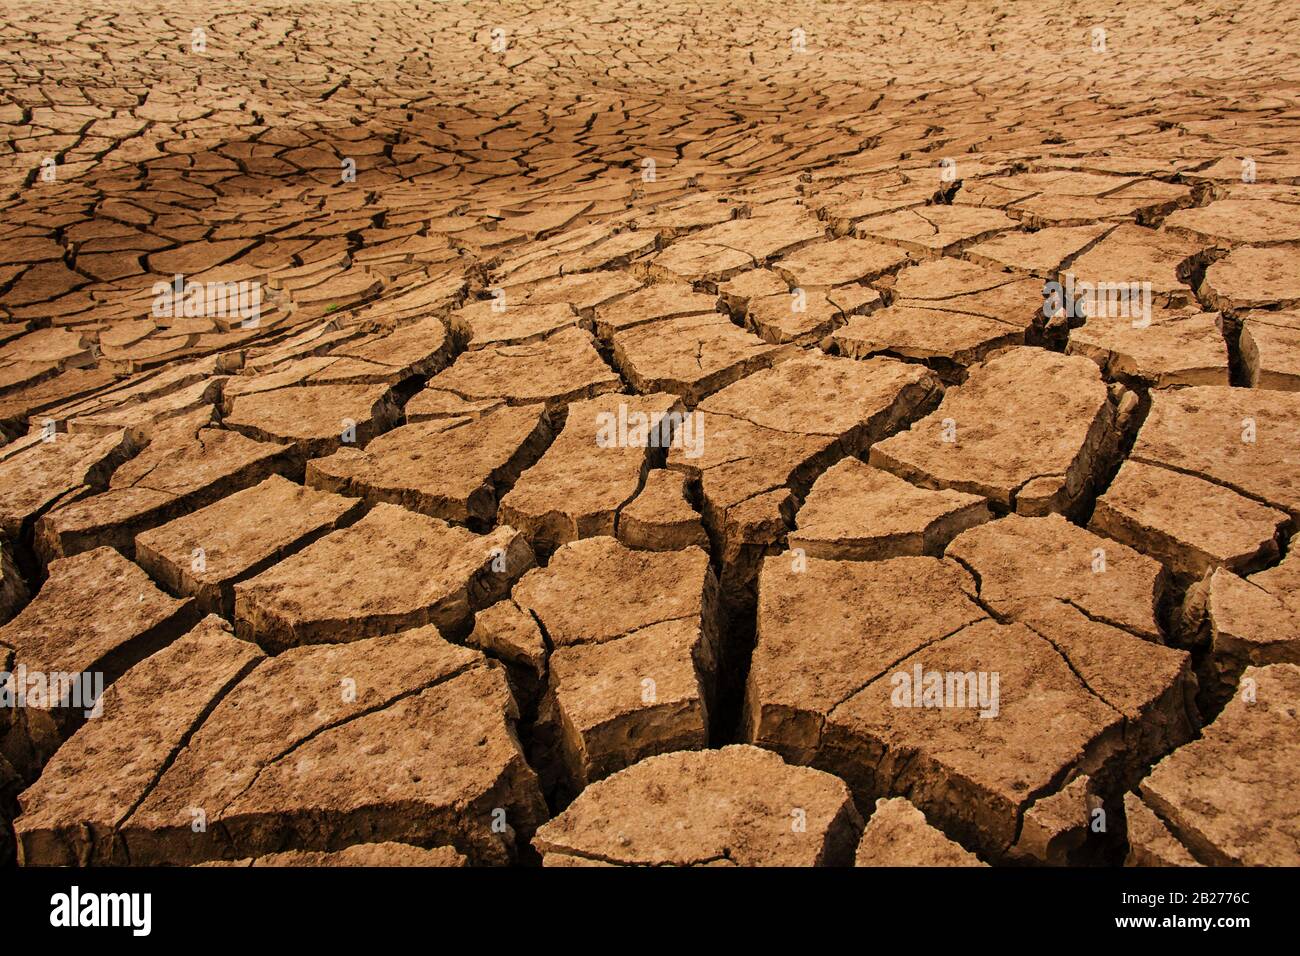 Nature background of cracked dry lands. Natural texture of soil with cracks. Broken clay surface of barren dryland wasteland close-up. Full frame to t Stock Photo